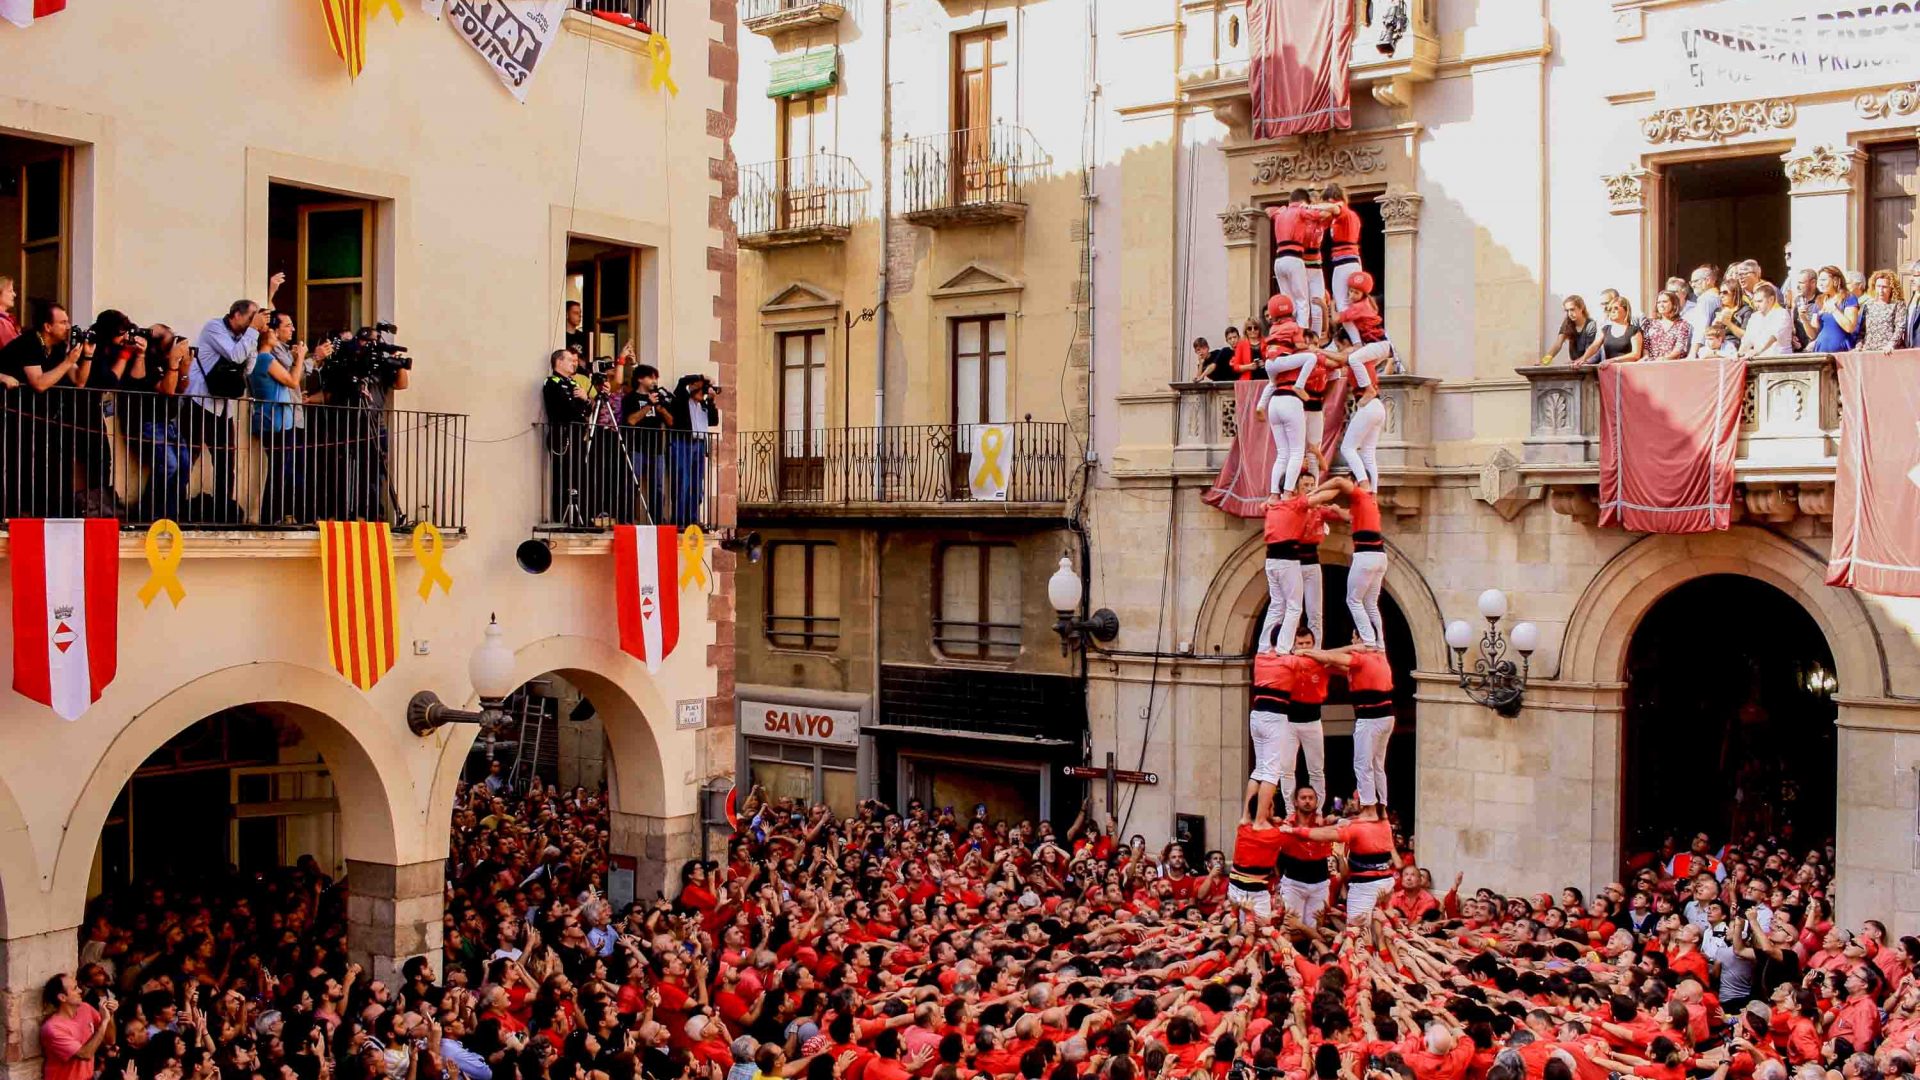 The Colla Joves team of castellers (human towers) in the tiny Catalan city of Valls.